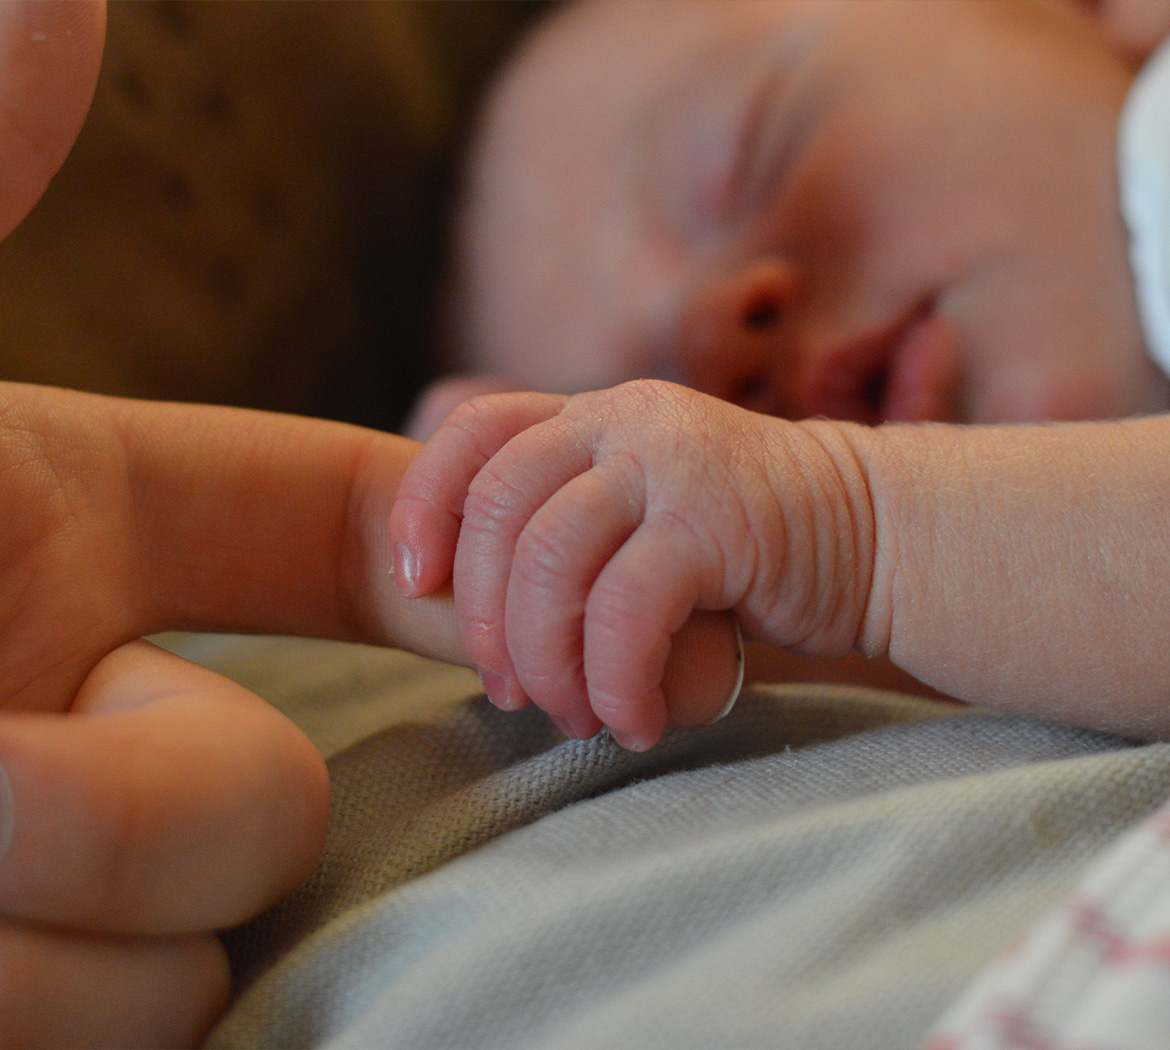 A tiny newborn grasps her caregiver's index finger while sleeping